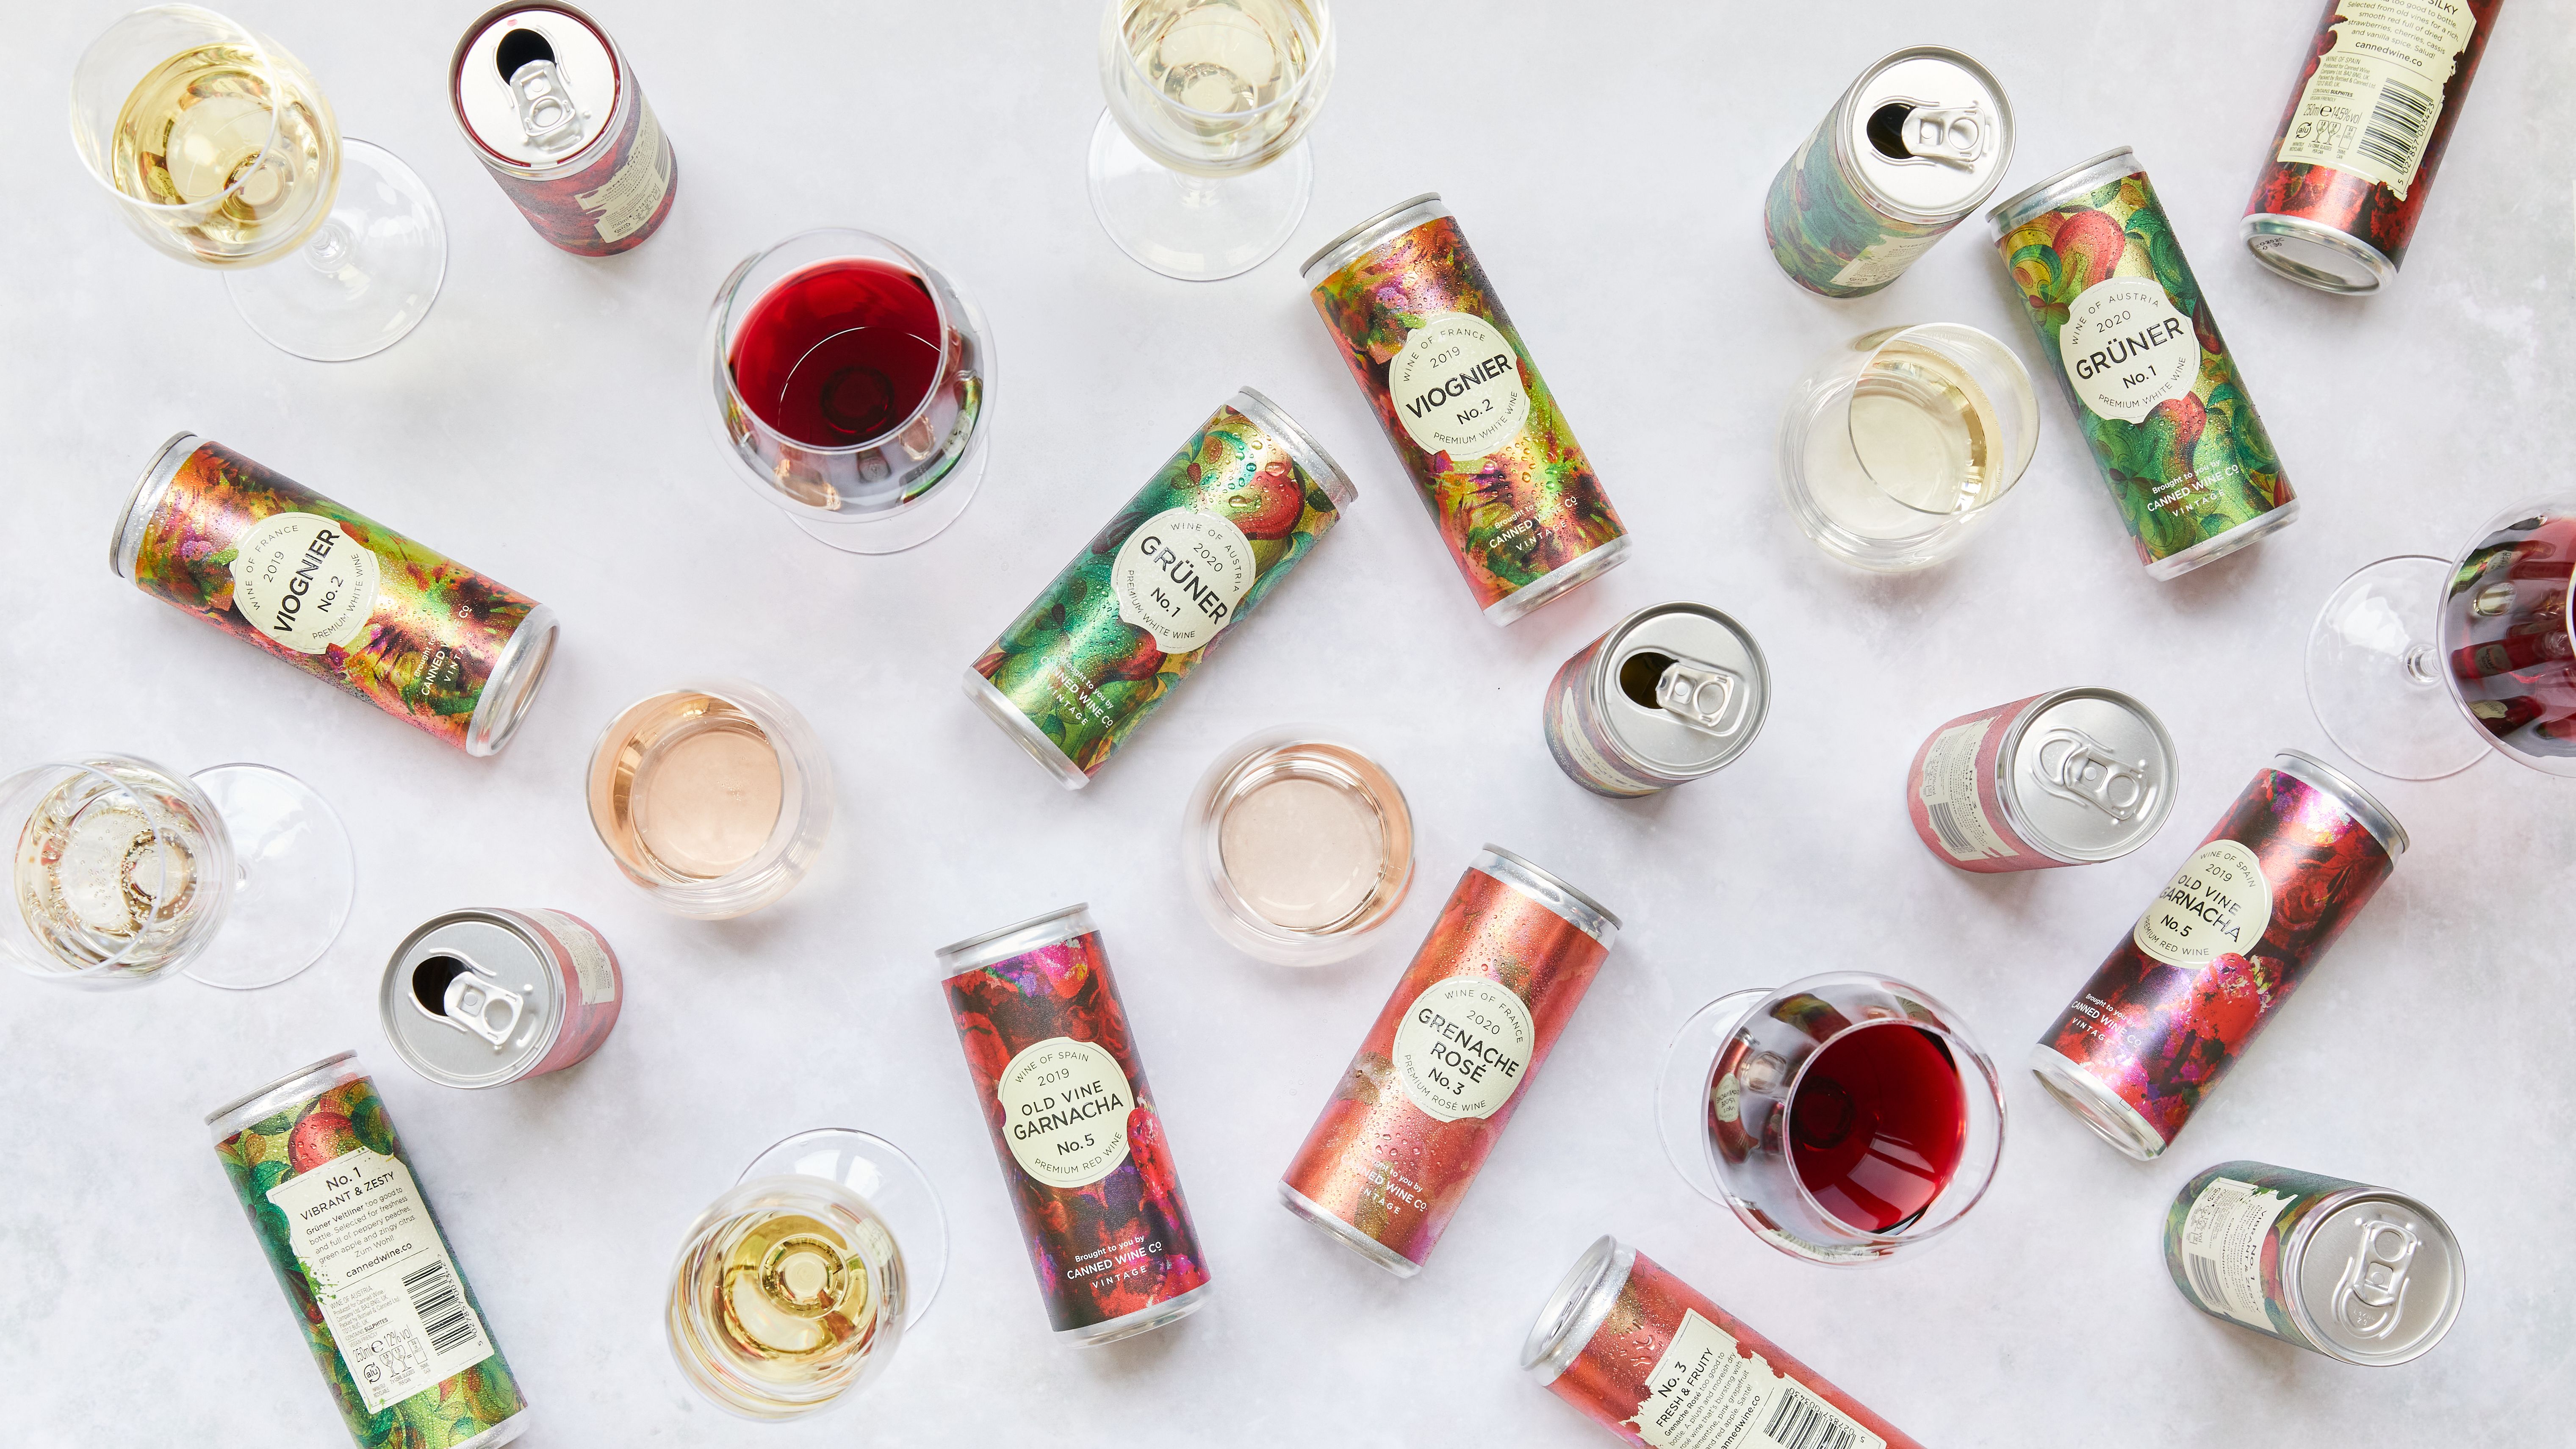 Canned Wine Co.